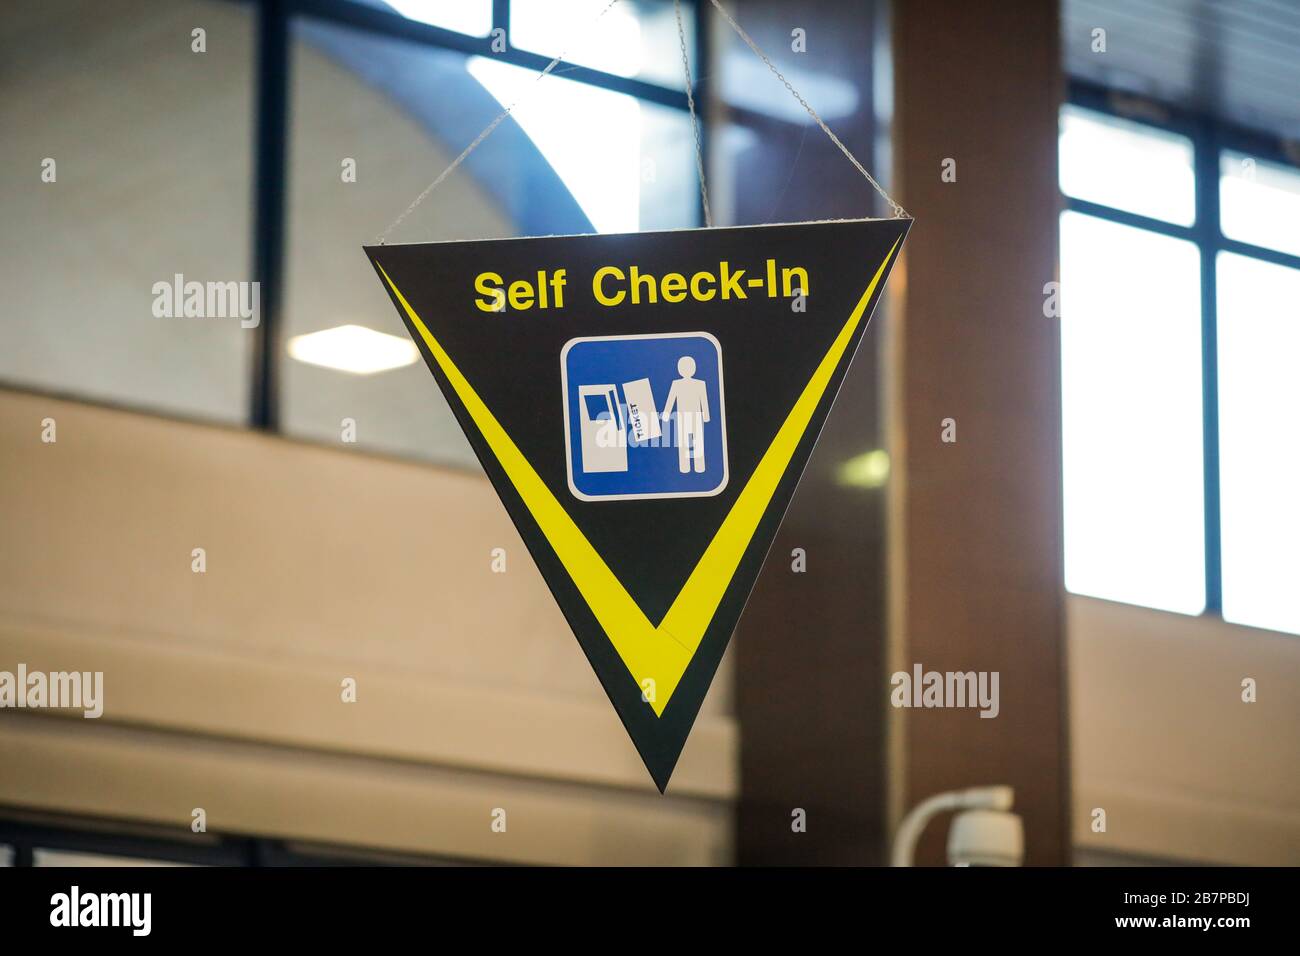 Self check-in sign inside an international airport Stock Photo